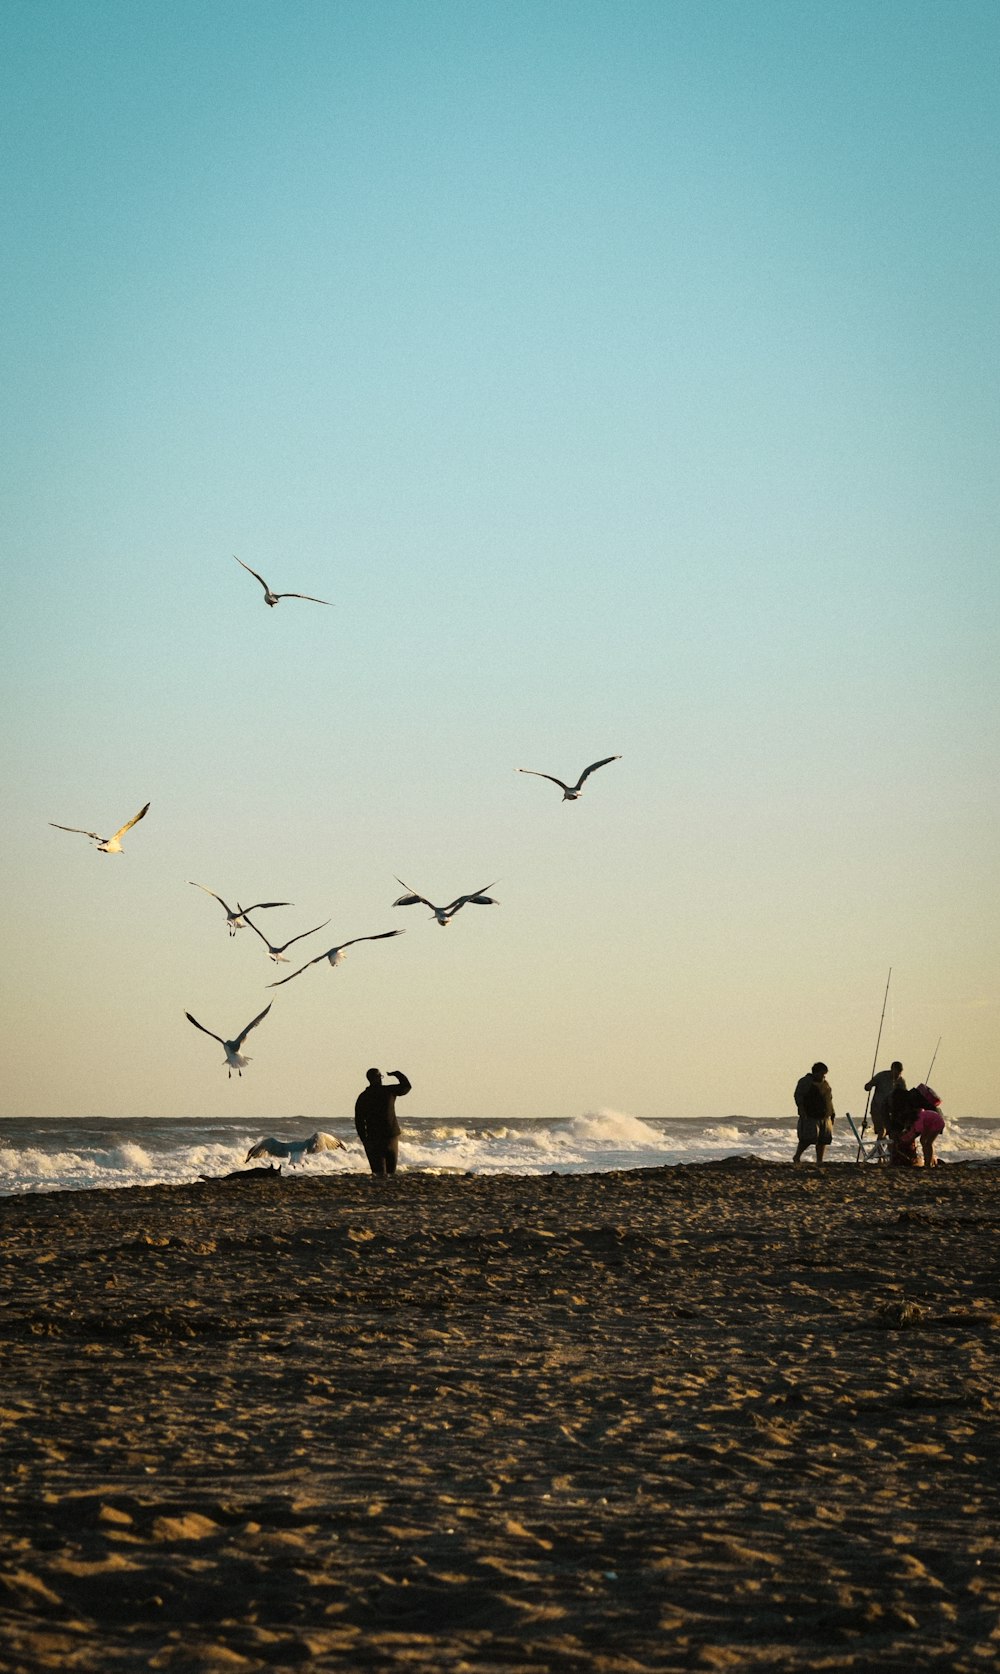 people on the beach with seagulls flying in the sky